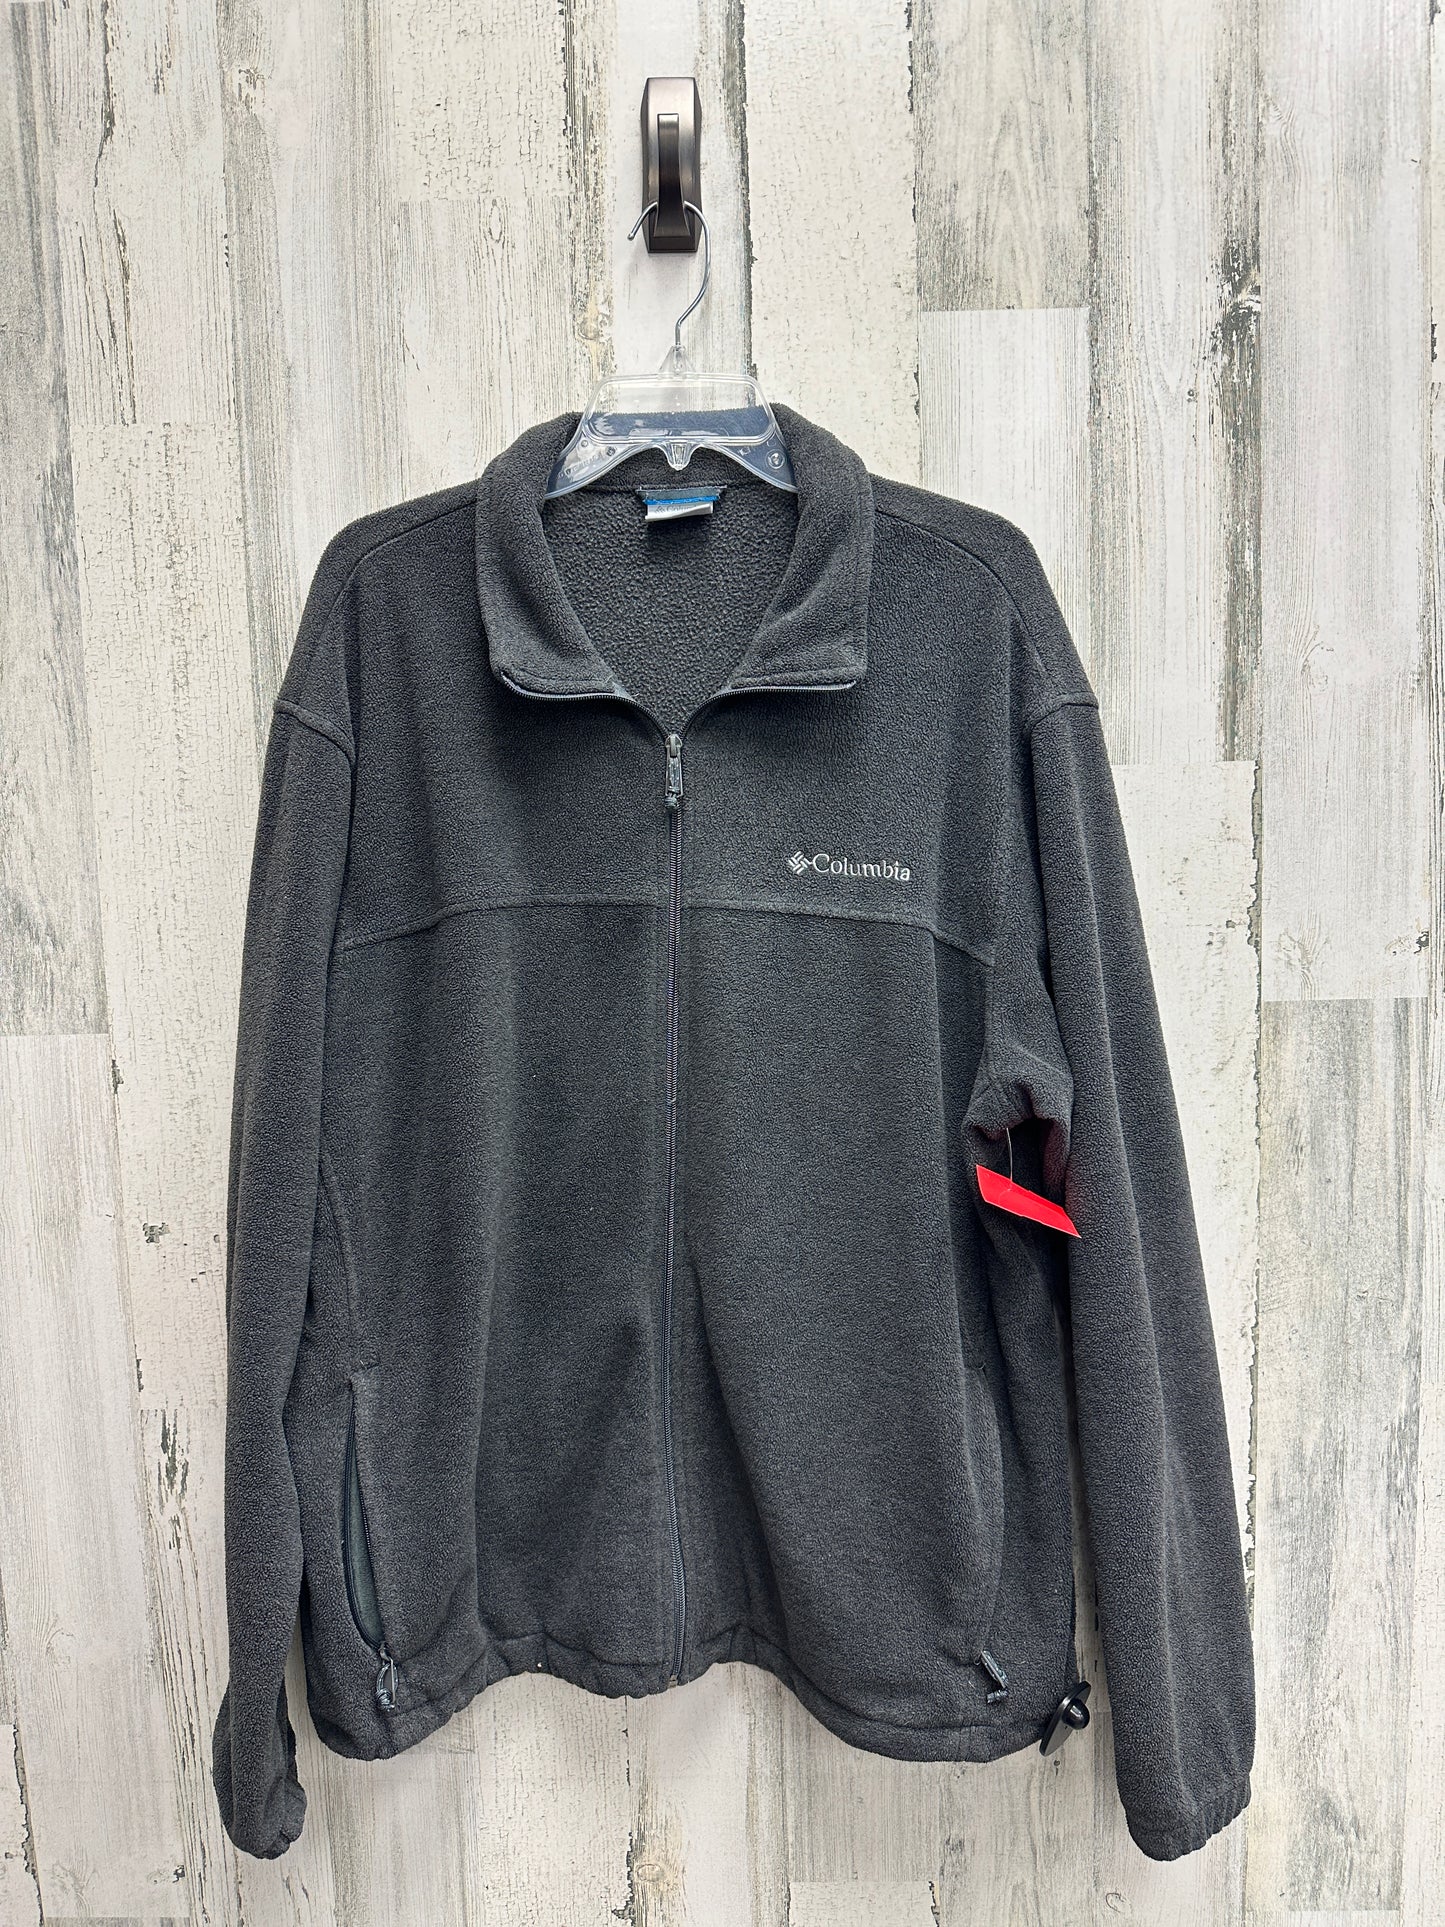 Jacket Other By Columbia  Size: Xl